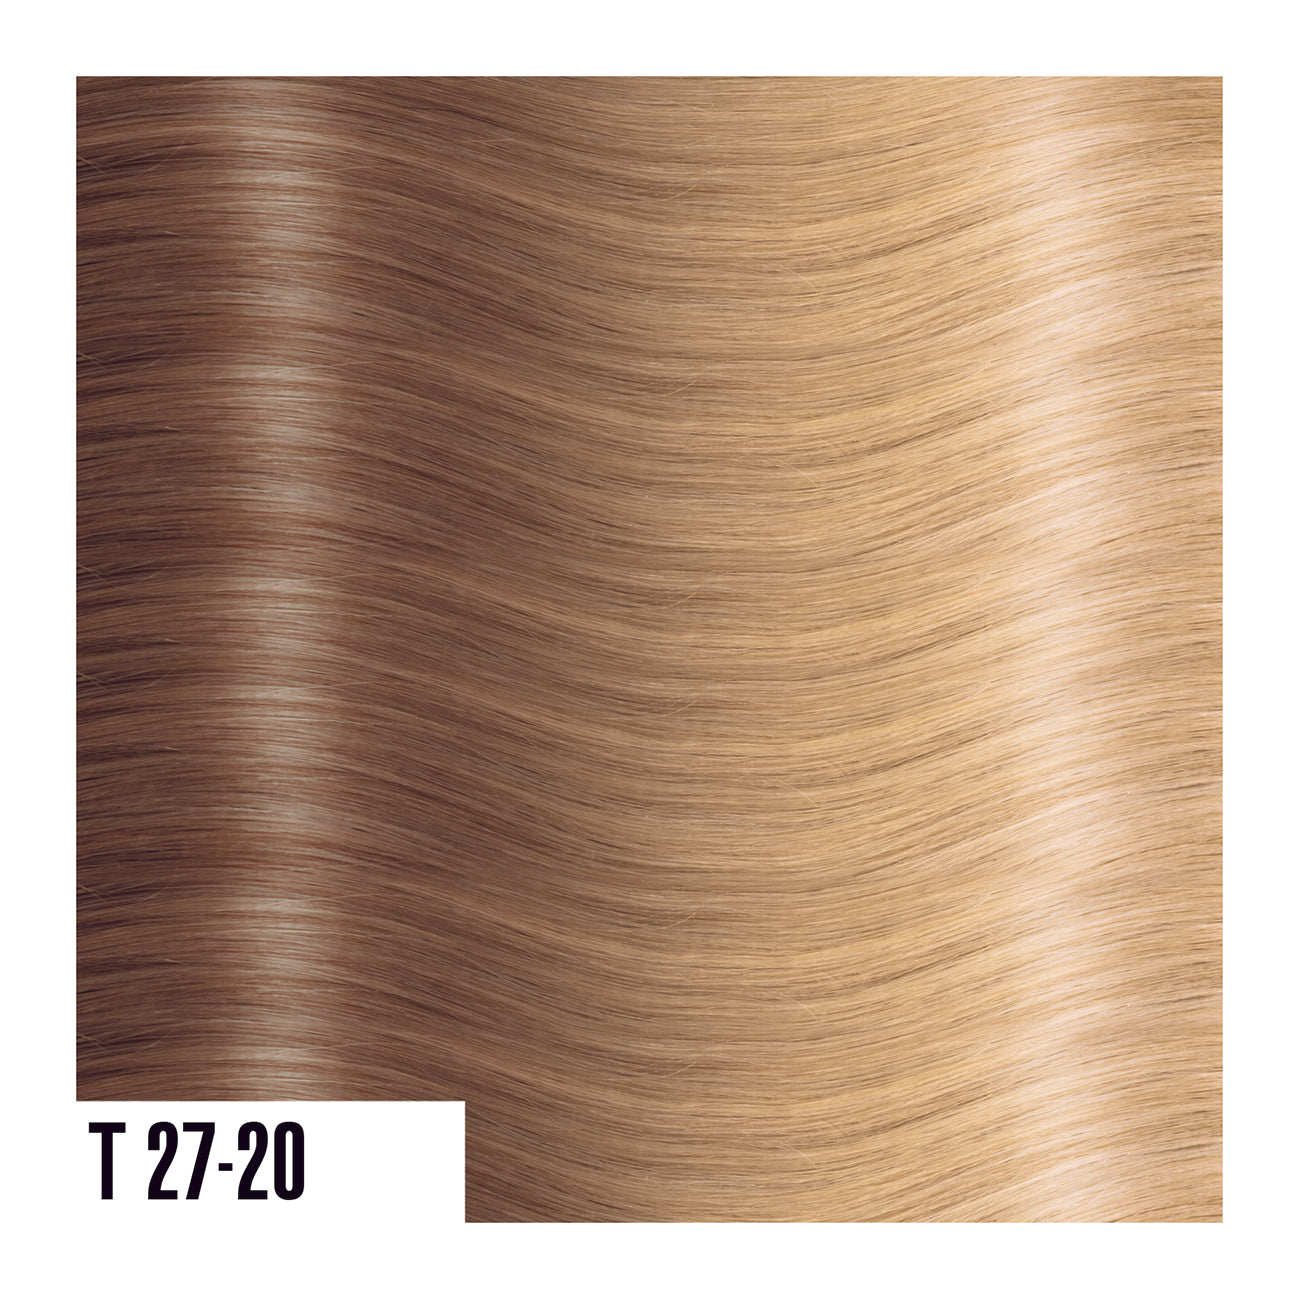 Weft System Straight Shatush (Two Tone Ombre)